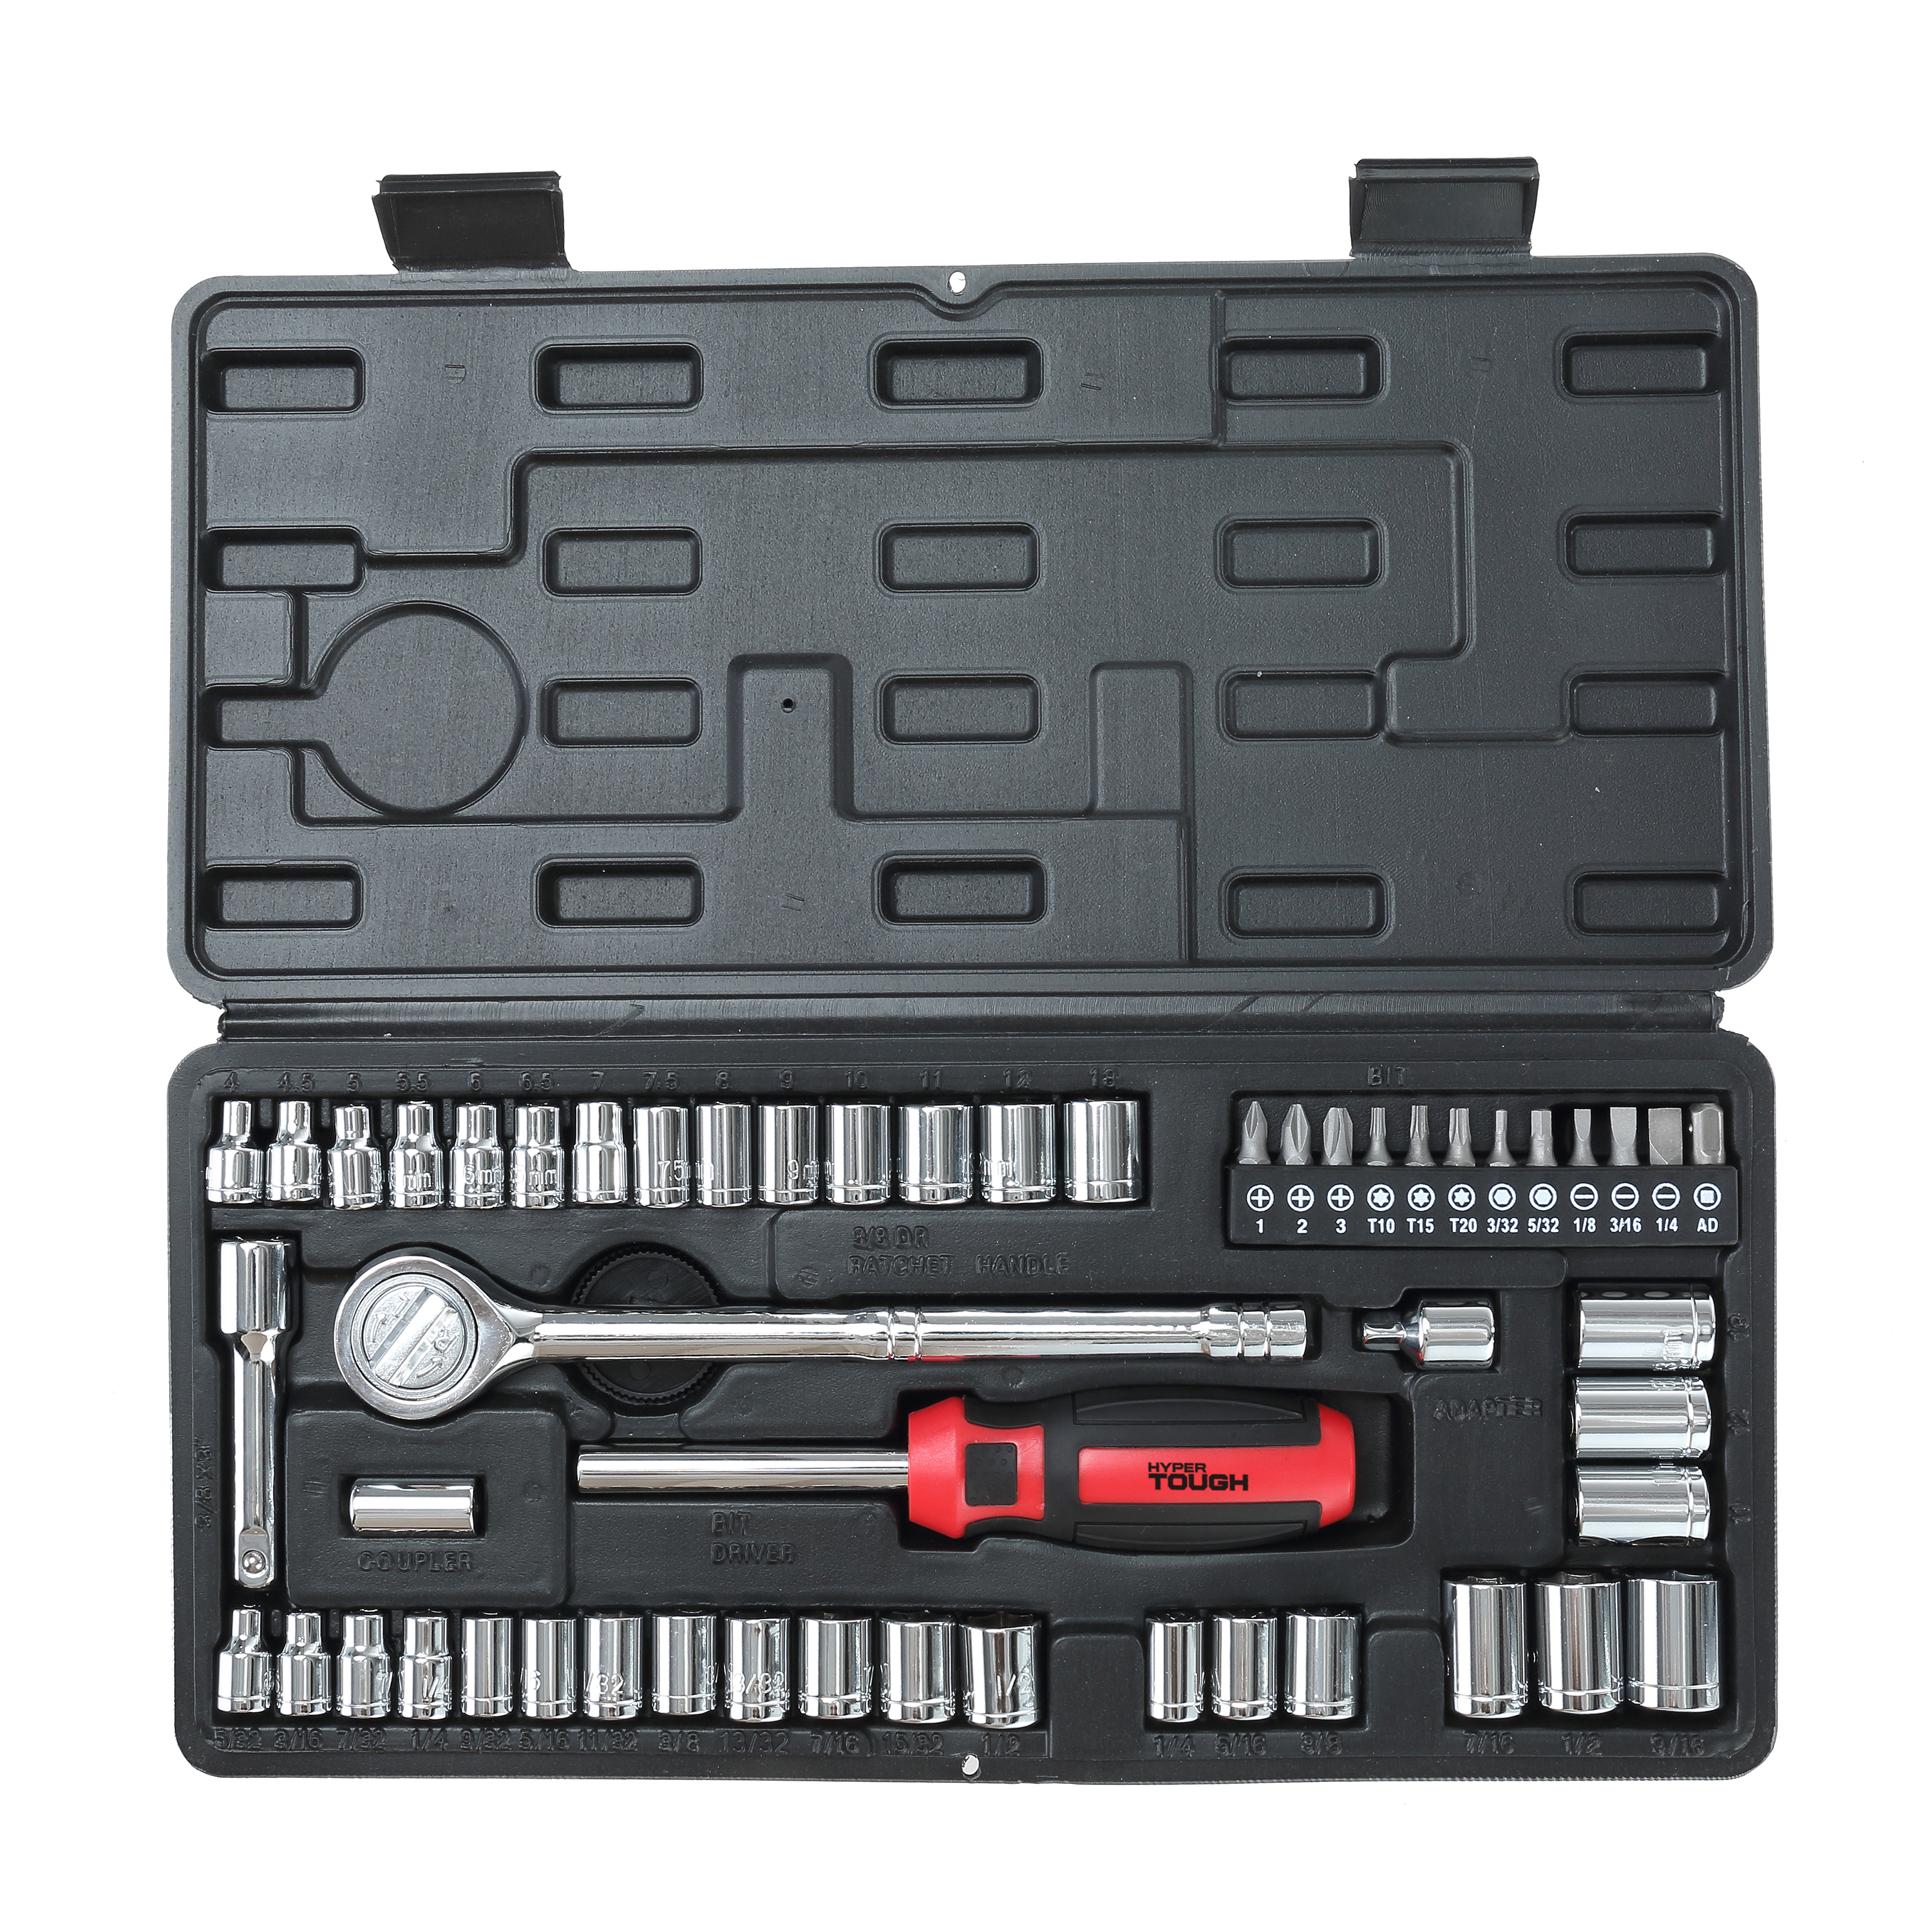 Hyper Tough 54 Piece 1/4 and 3/8 inch Drive Socket Set - image 1 of 11